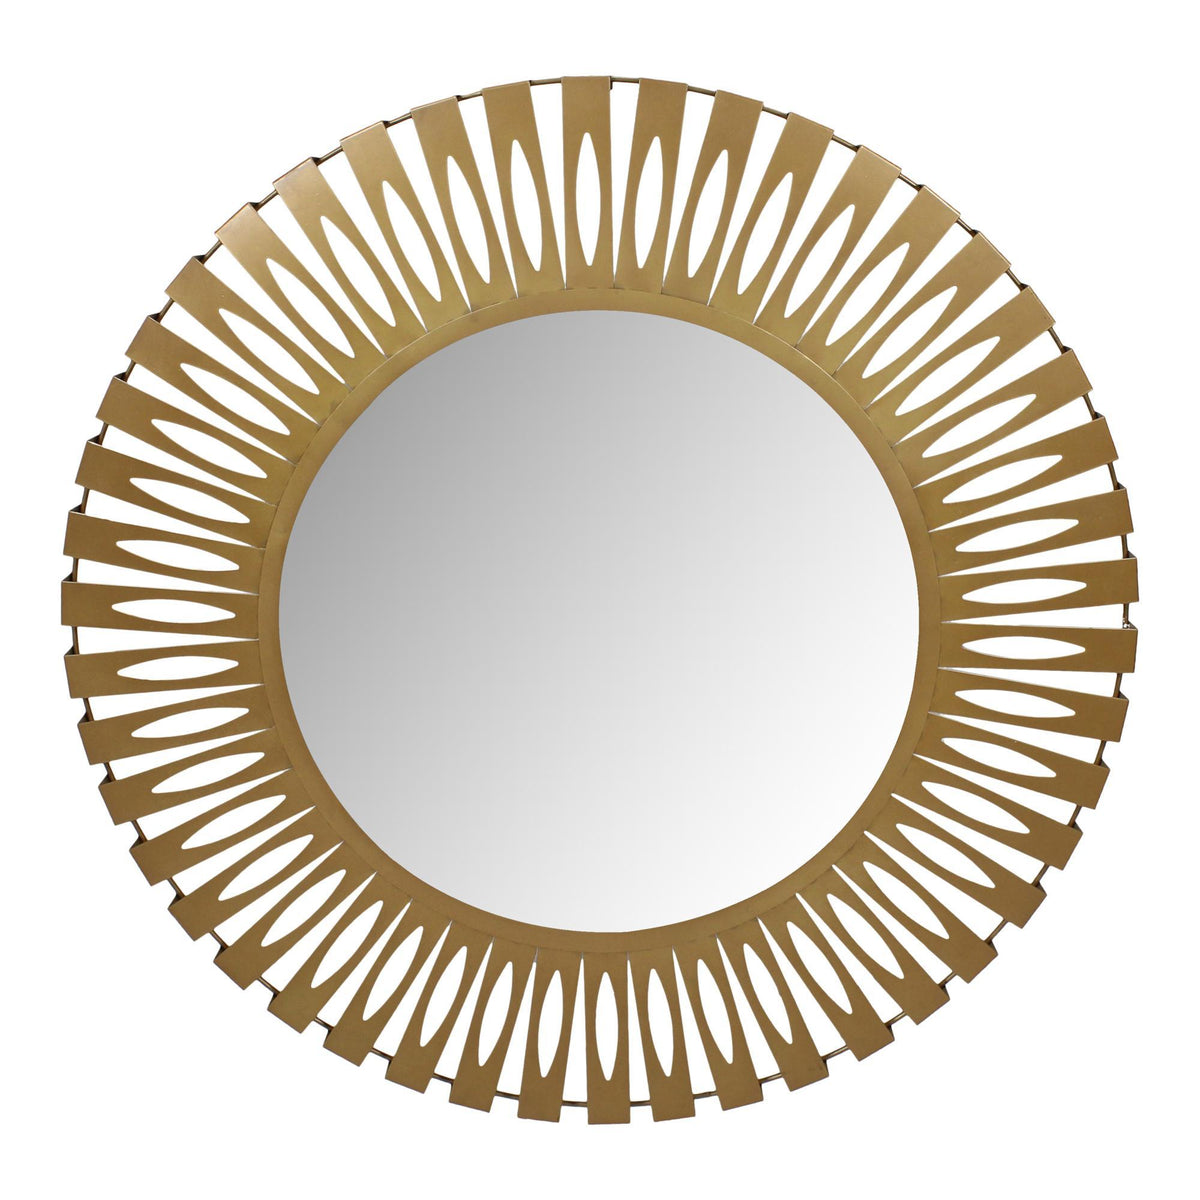 Moe's Home Collection Radiate Mirror Gold - TY-1038-32